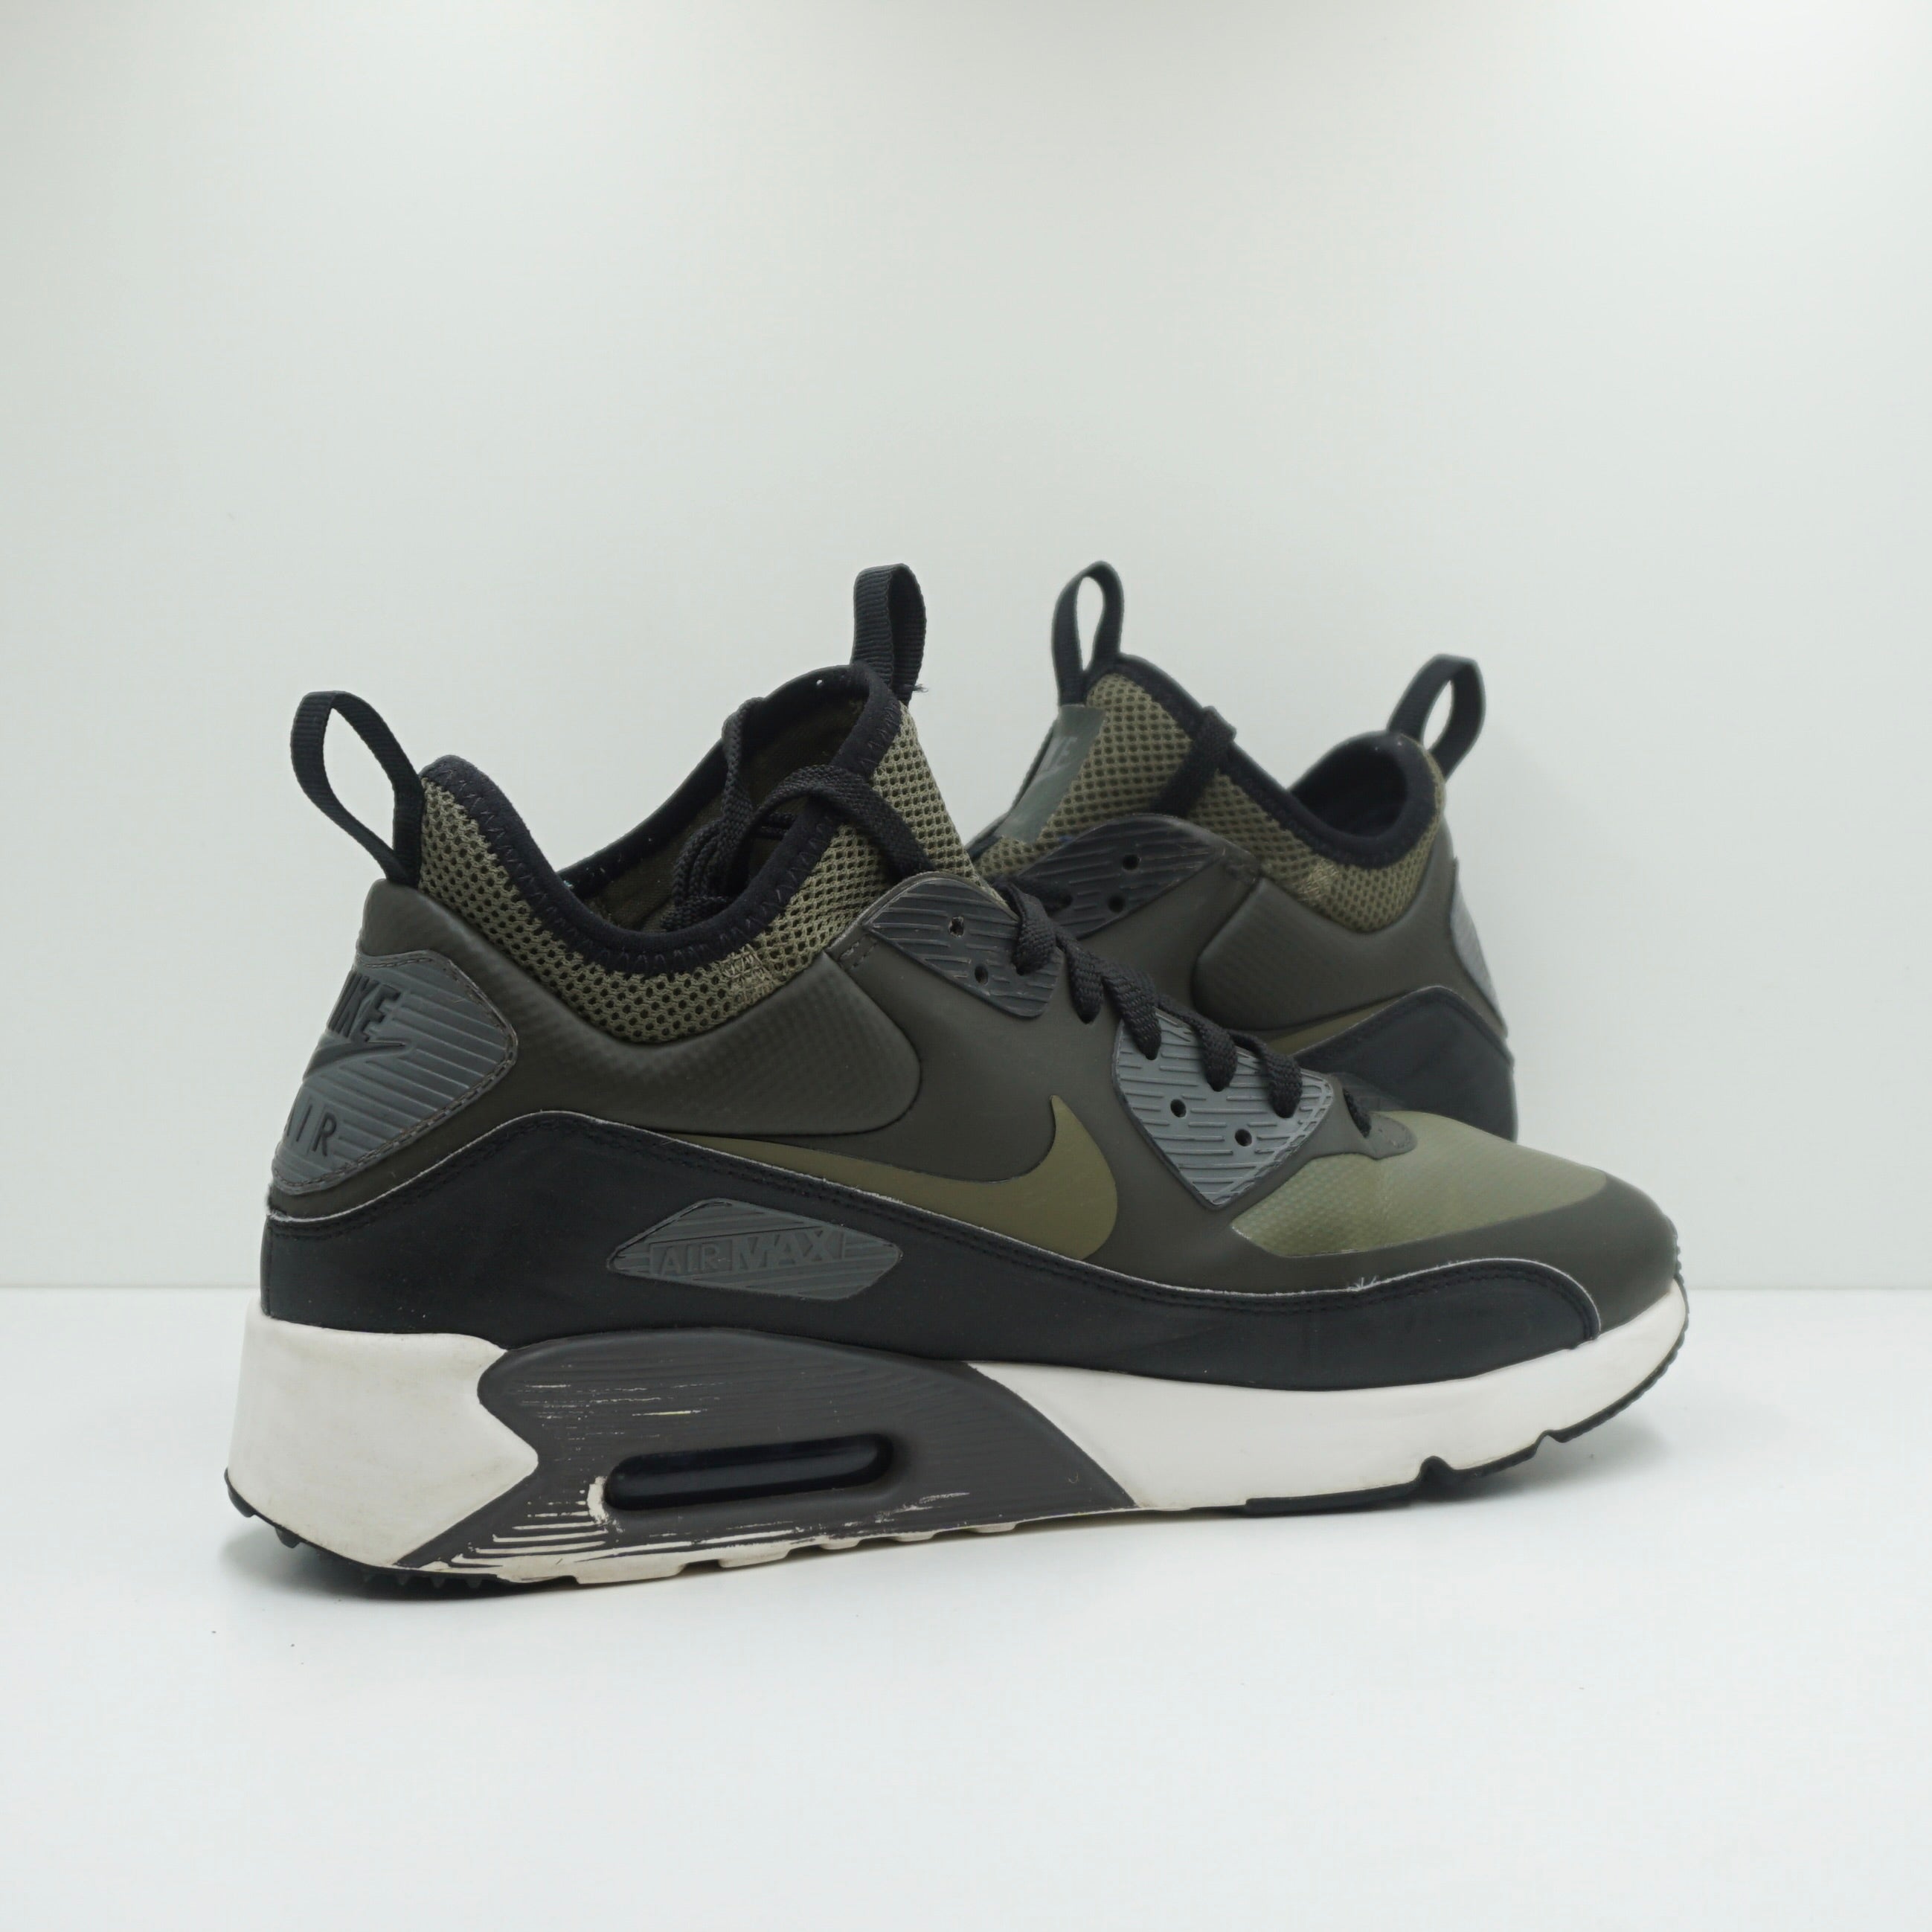 Nike Air Max 90 Ultra Mid Winter Sequoia